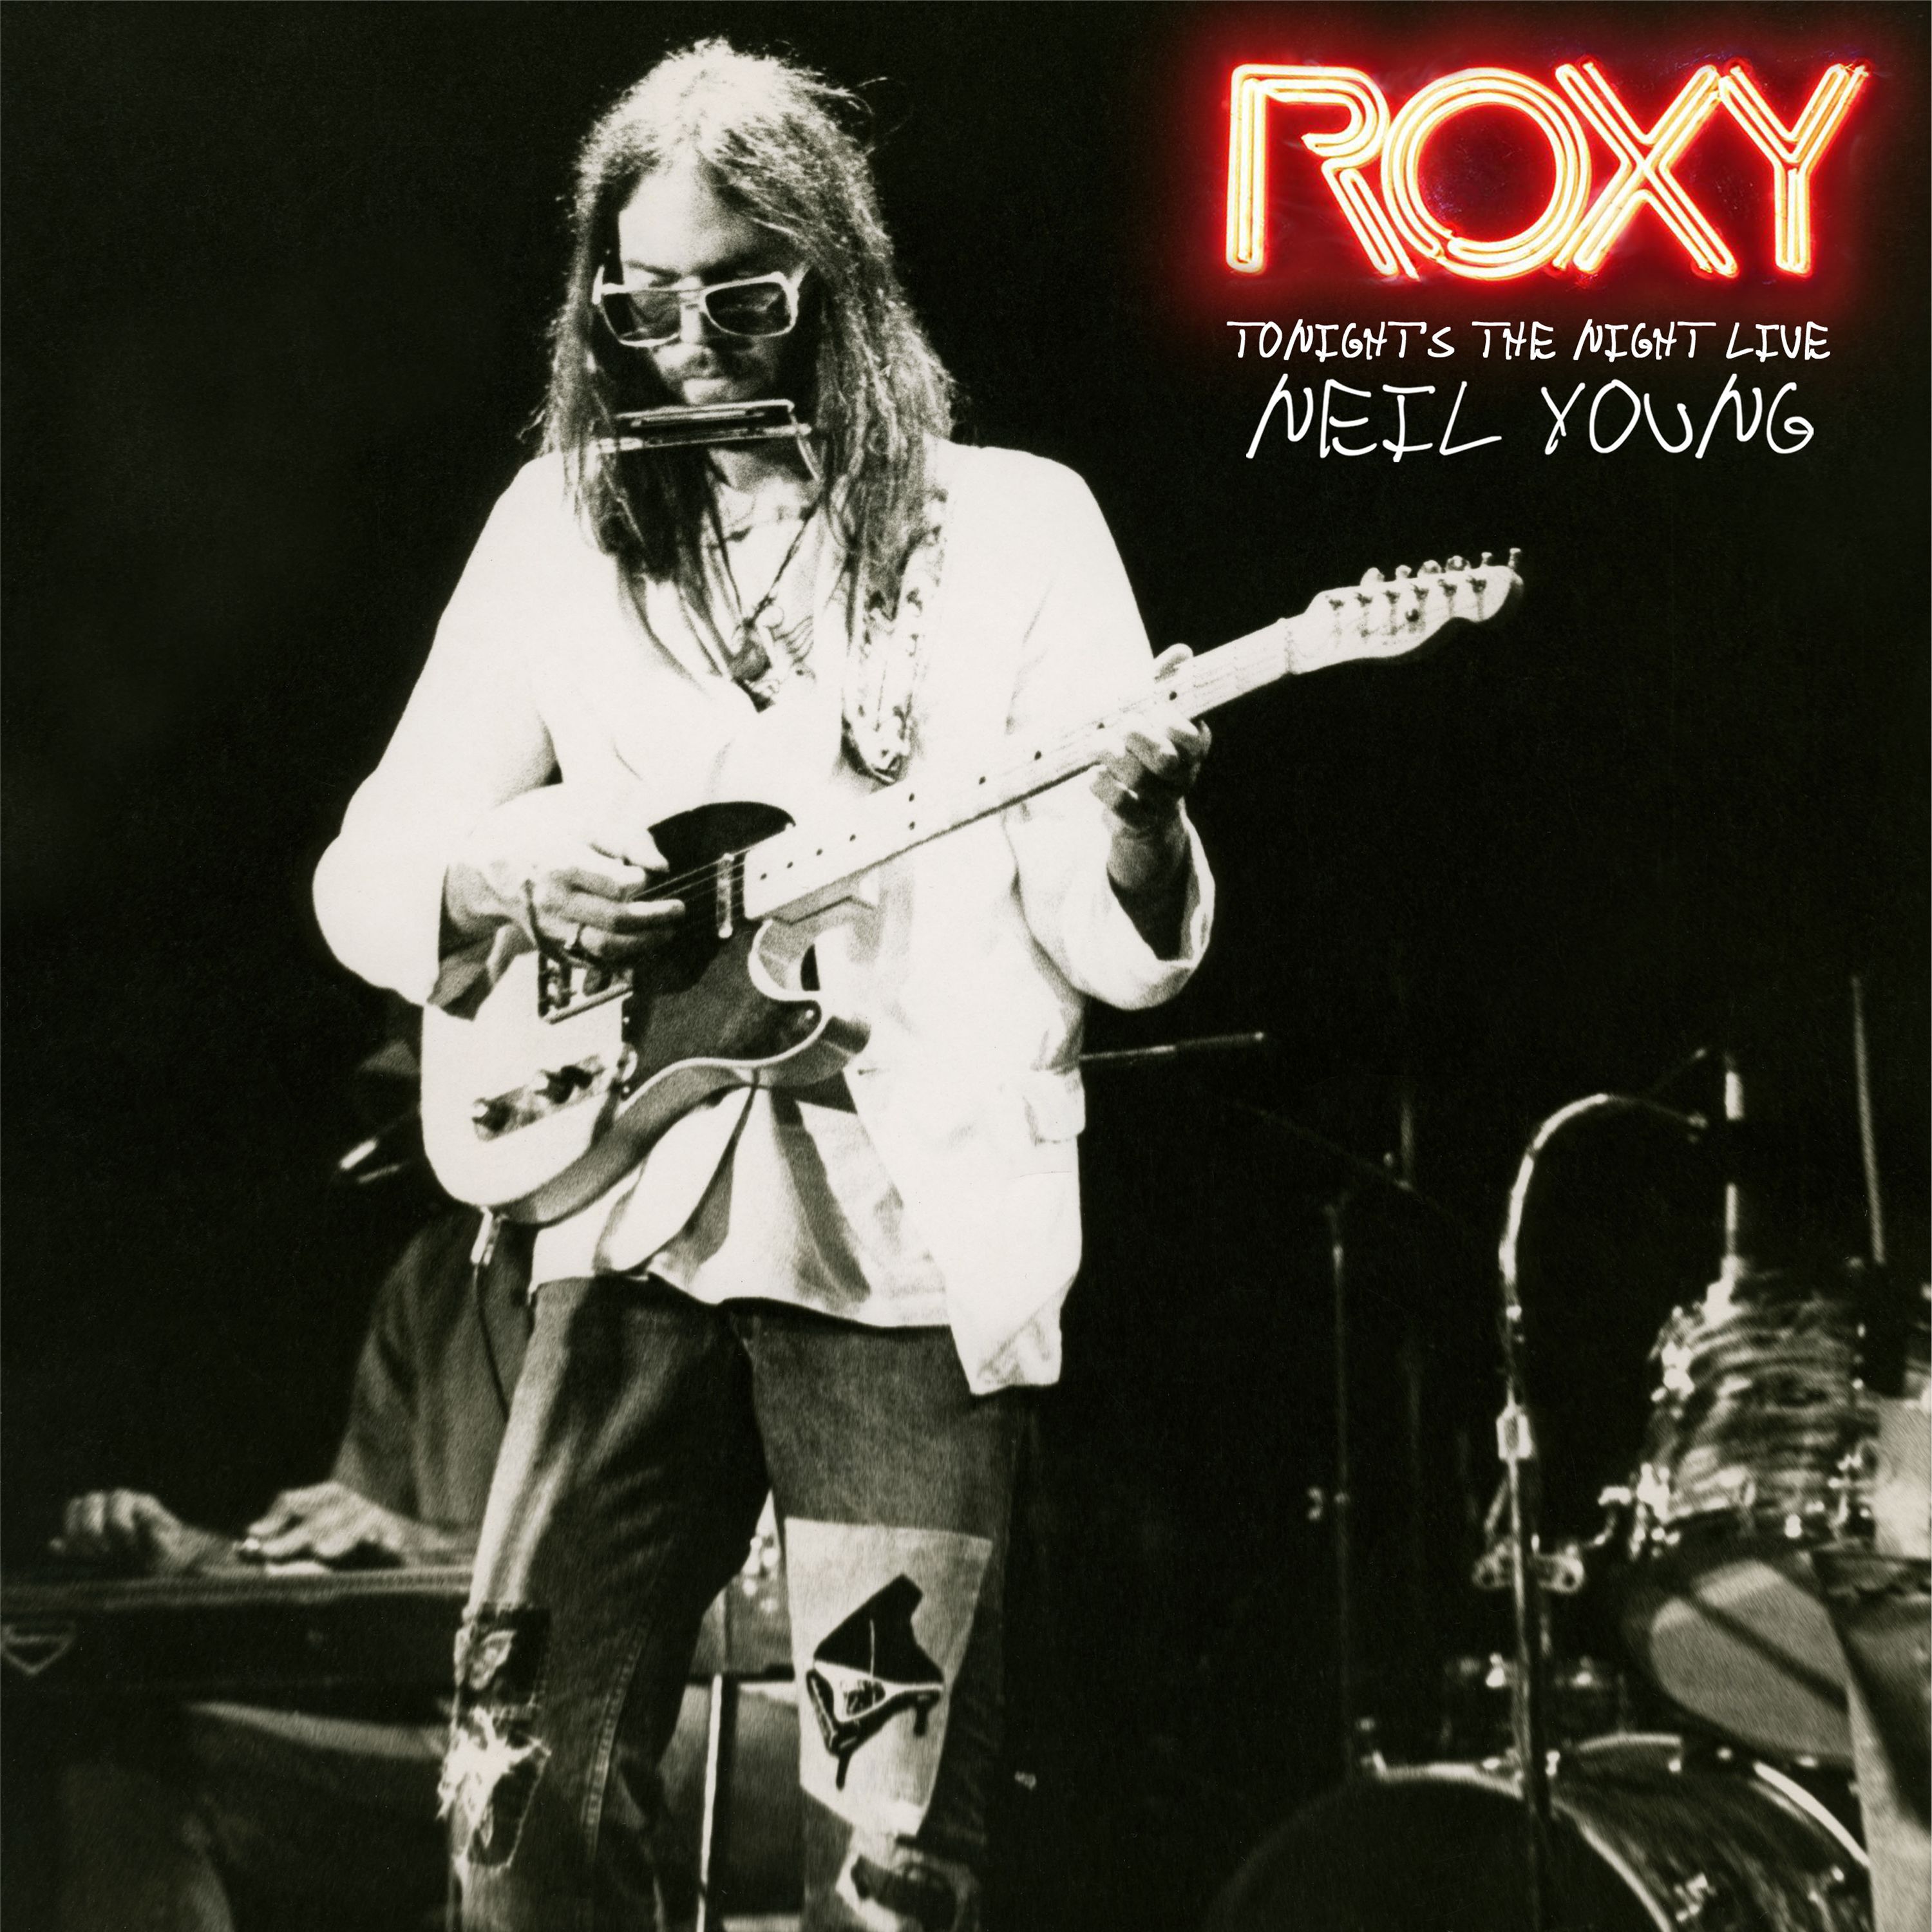 Neil Young - 1975 - Roxy Tonight's The Night Live [2018] 24-192